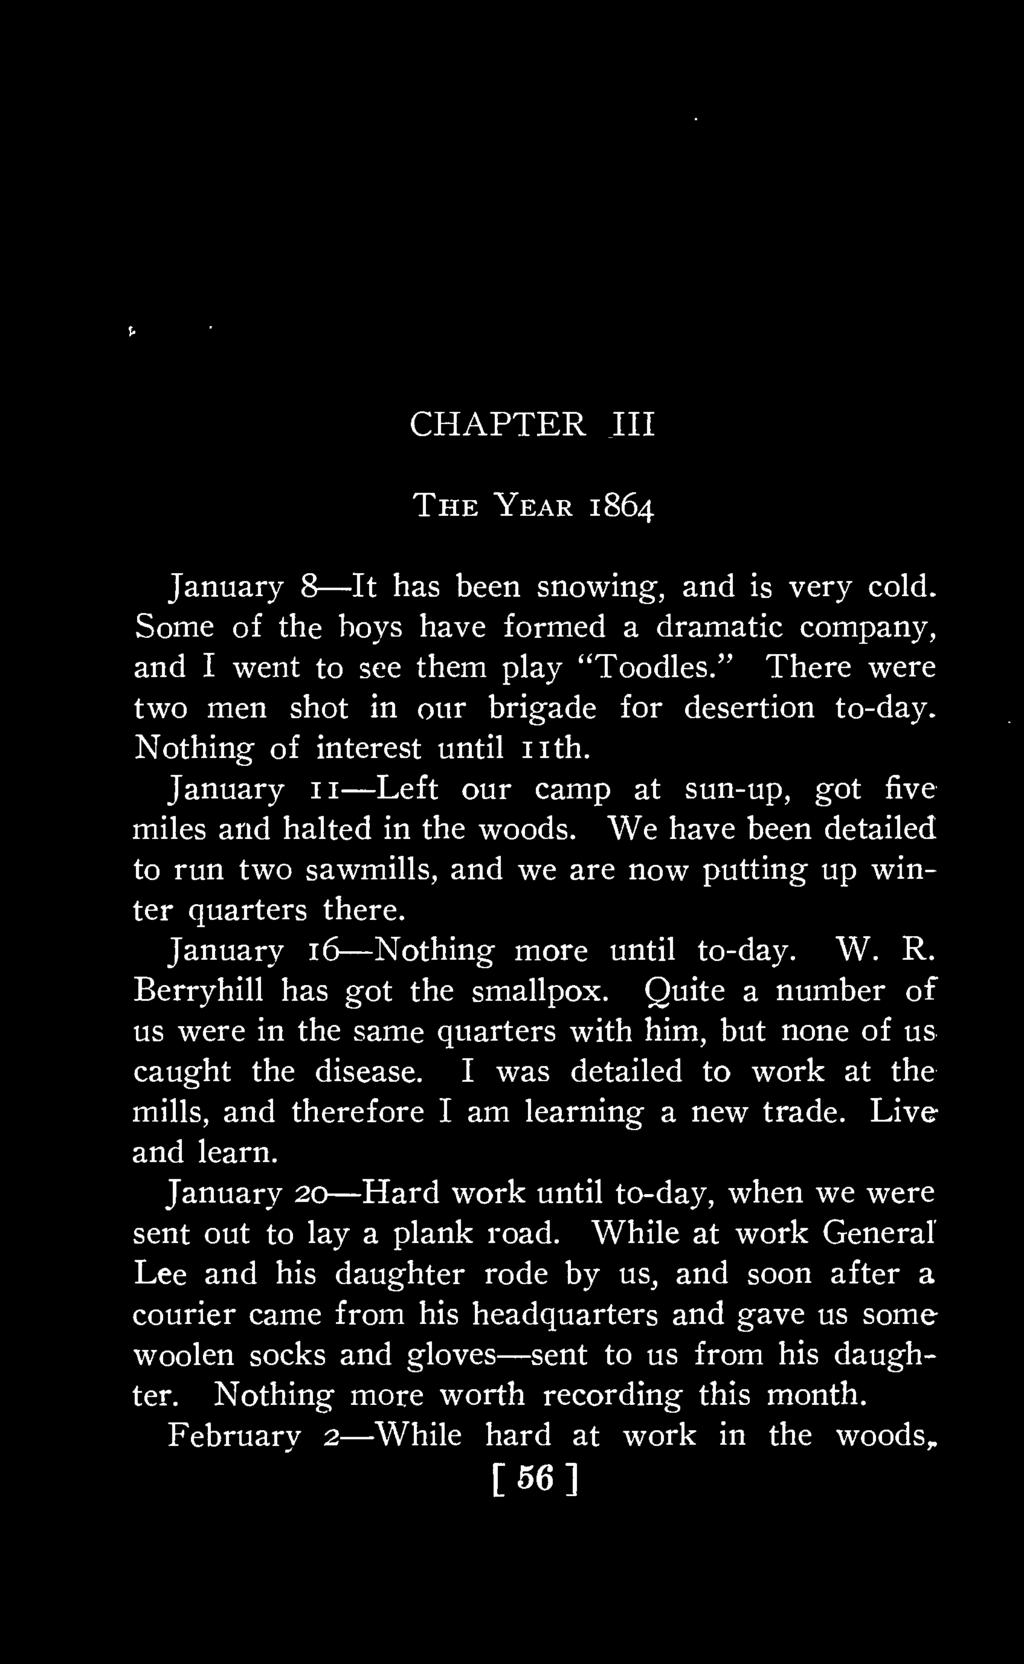 CHAPTER III The Year 1864 January 8 It has been snowing, and is very cold. Some of the boys have formed a dramatic company, and I went to see them play "Toodles.